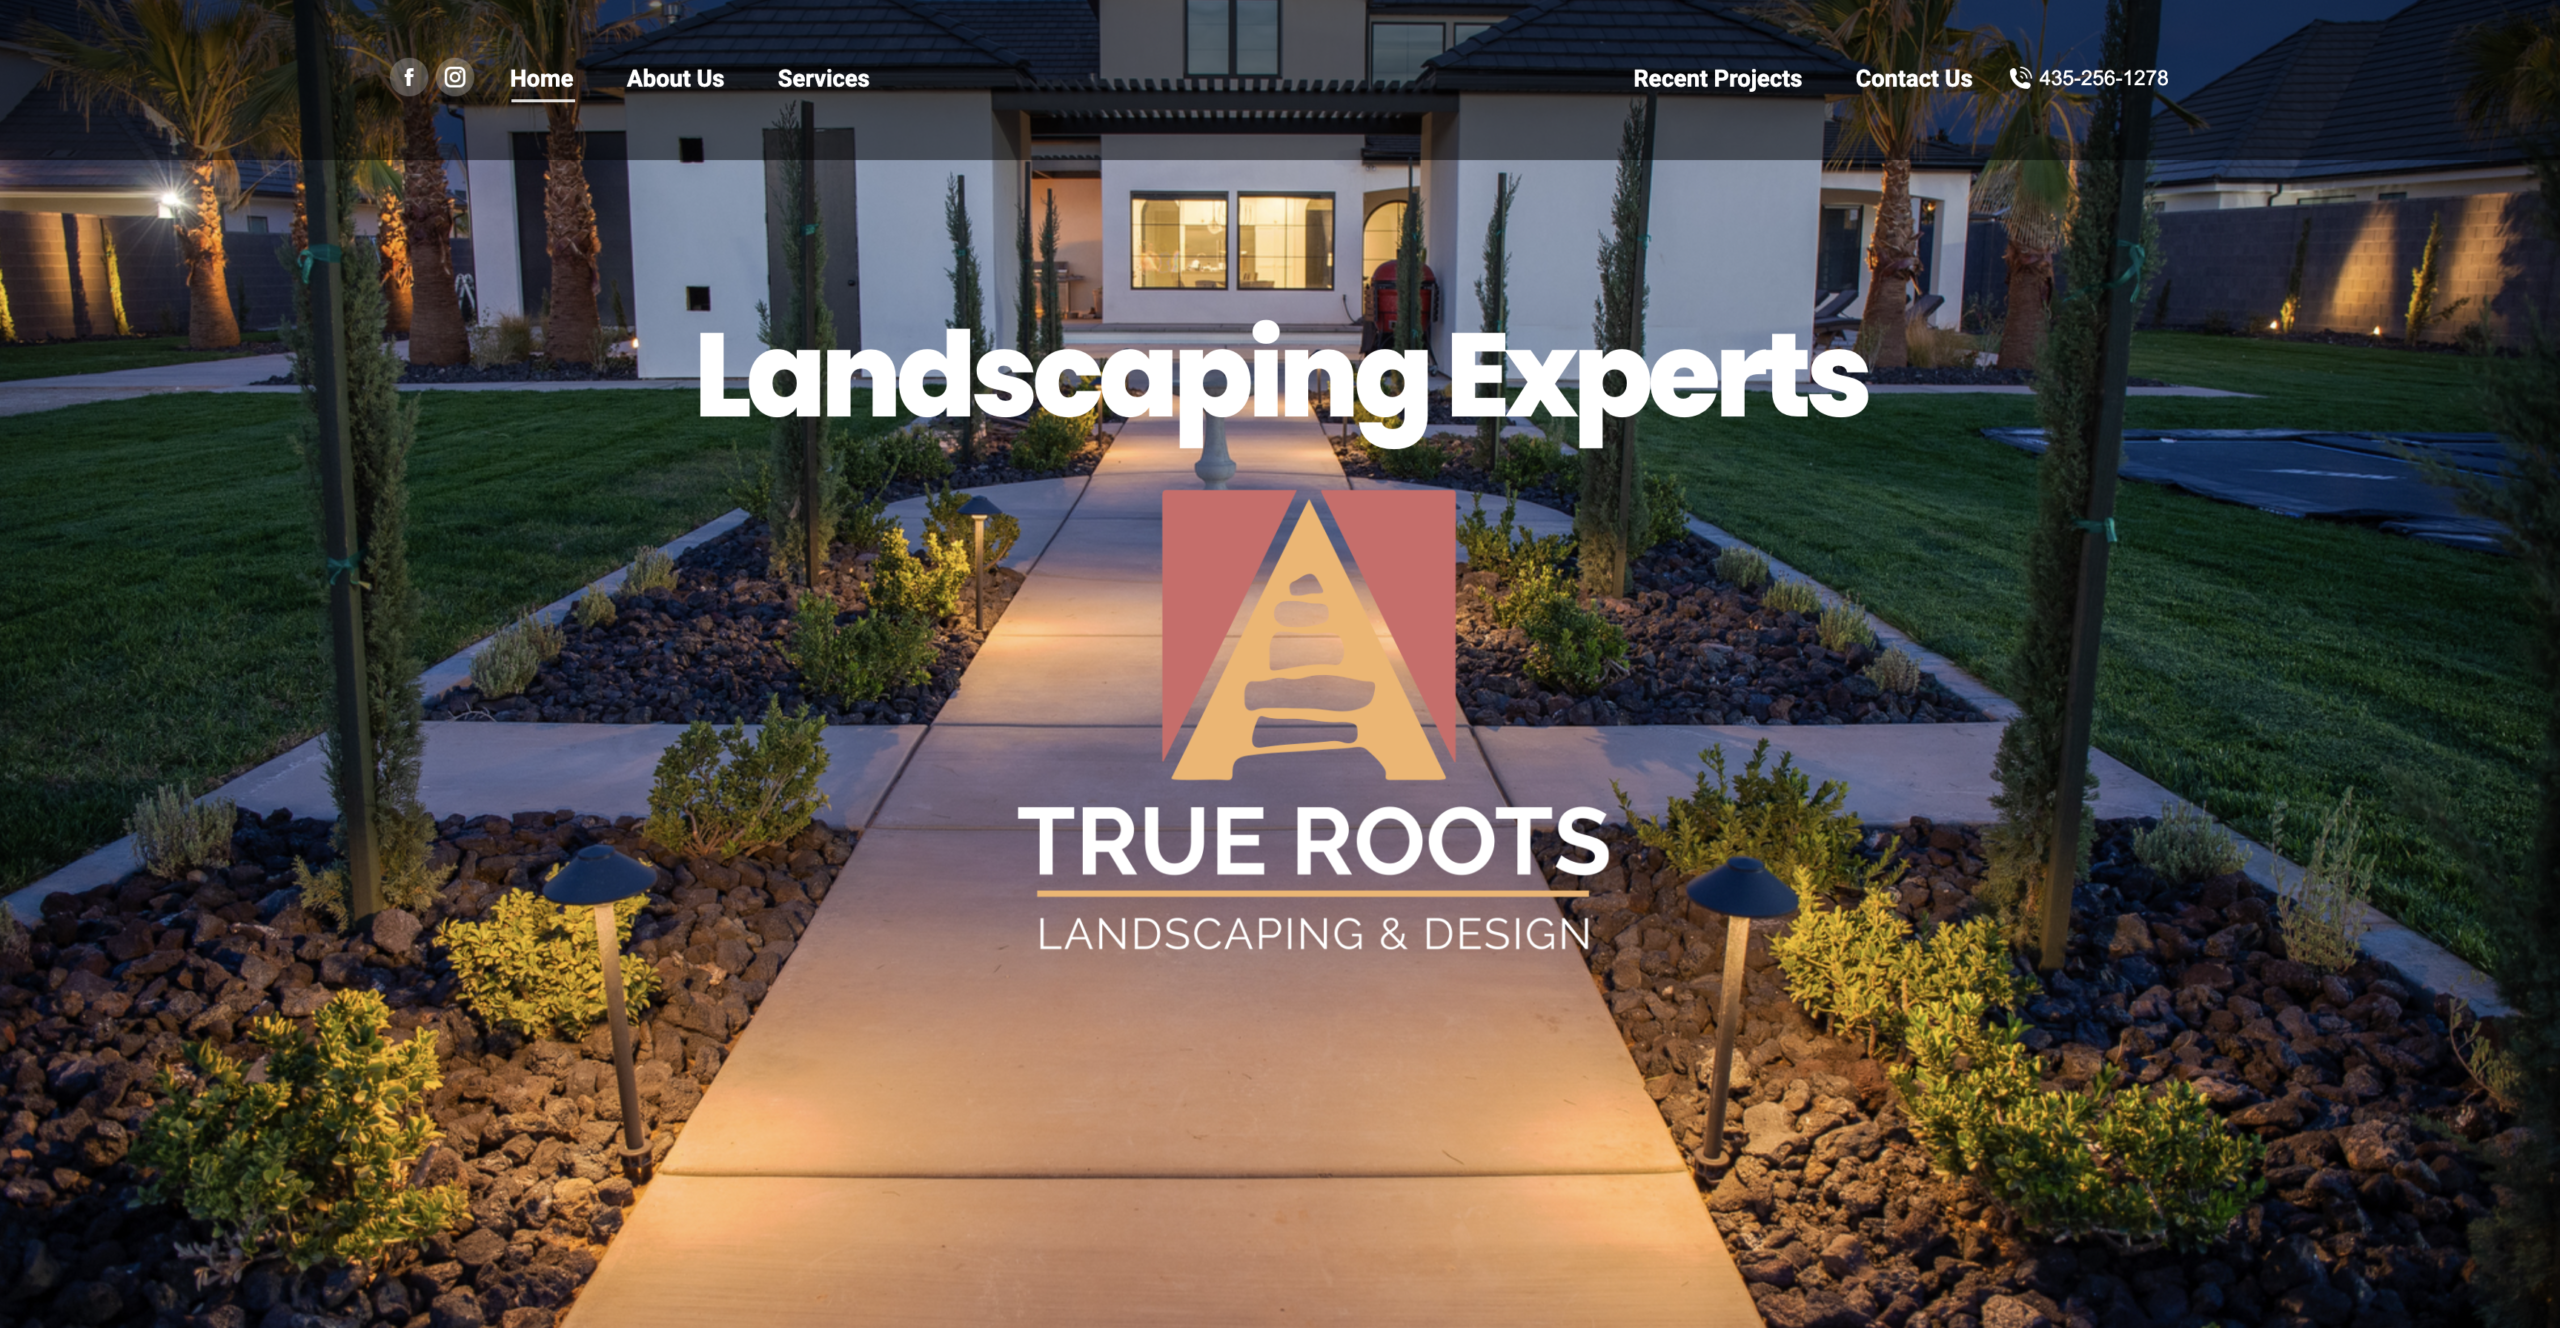 True Roots Landscaping and Design's Website